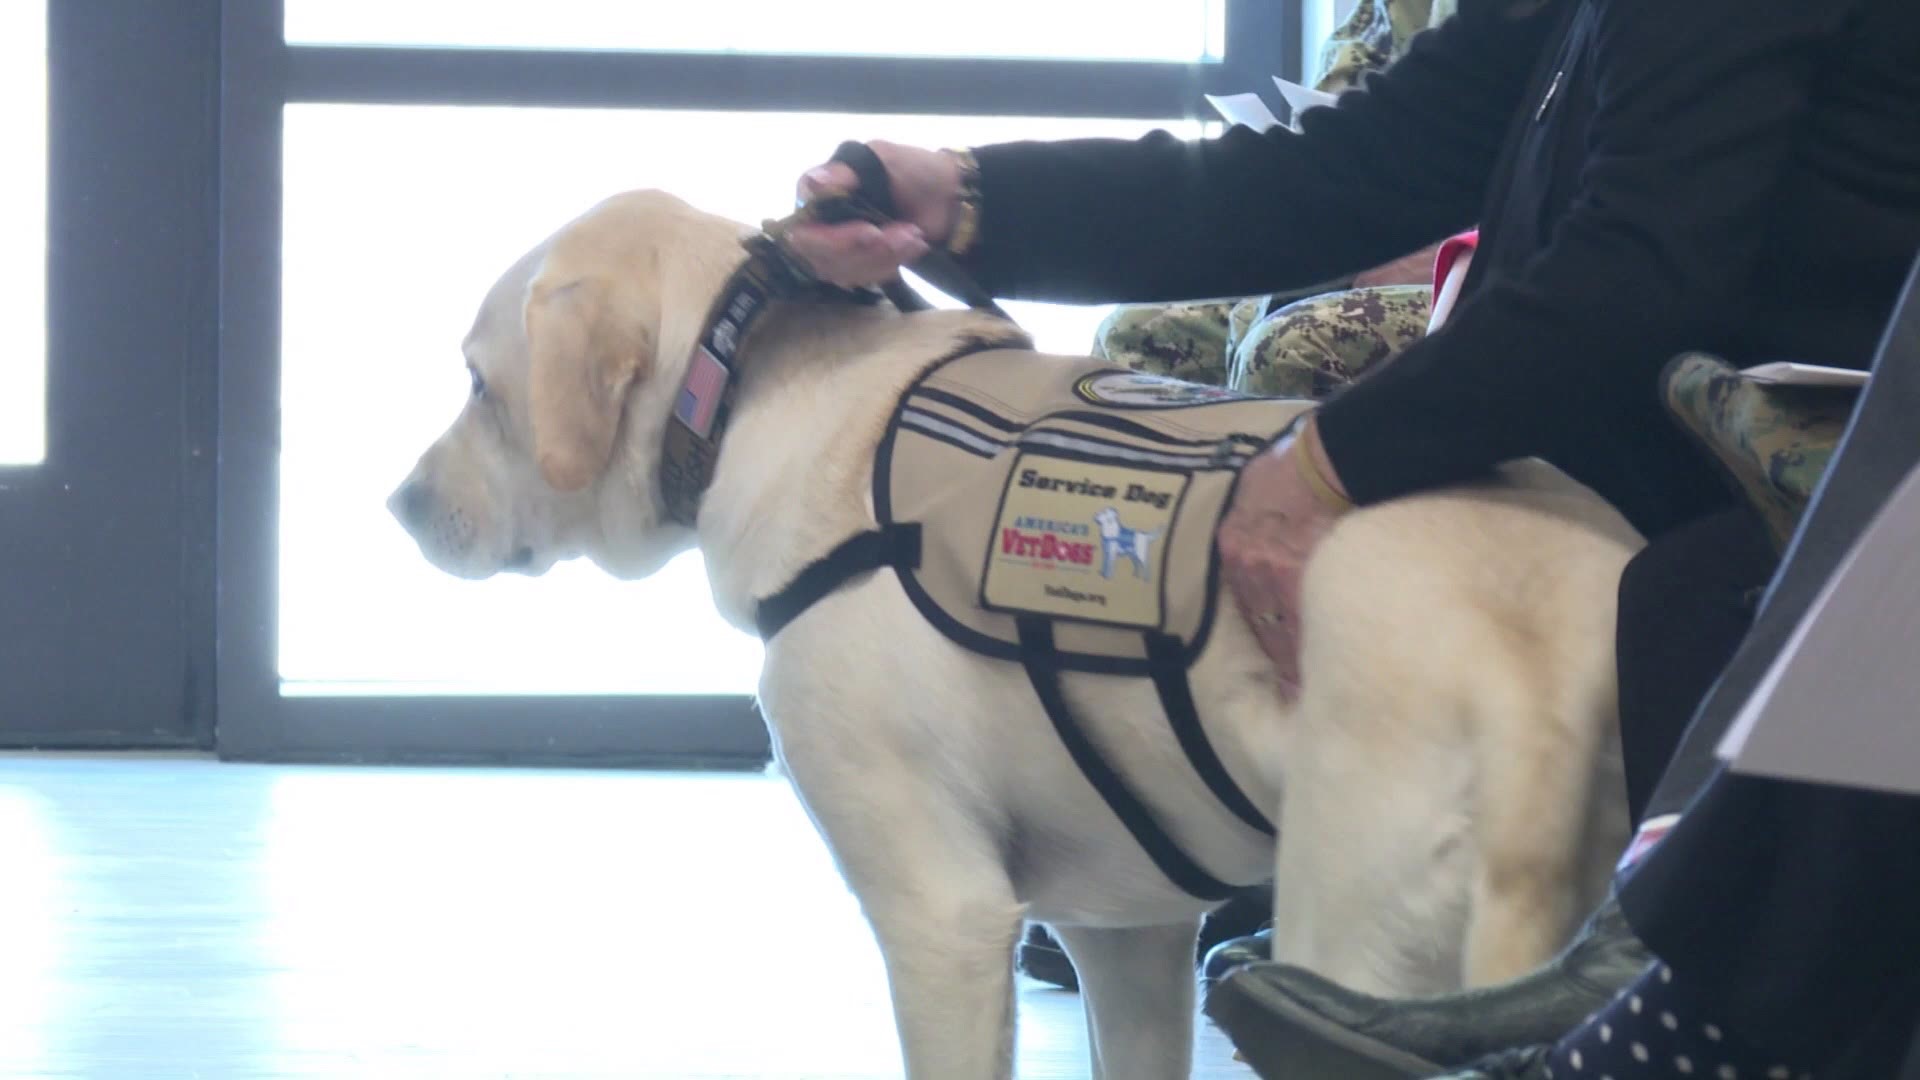 Sully the service dog is officially on the clock at his new home.